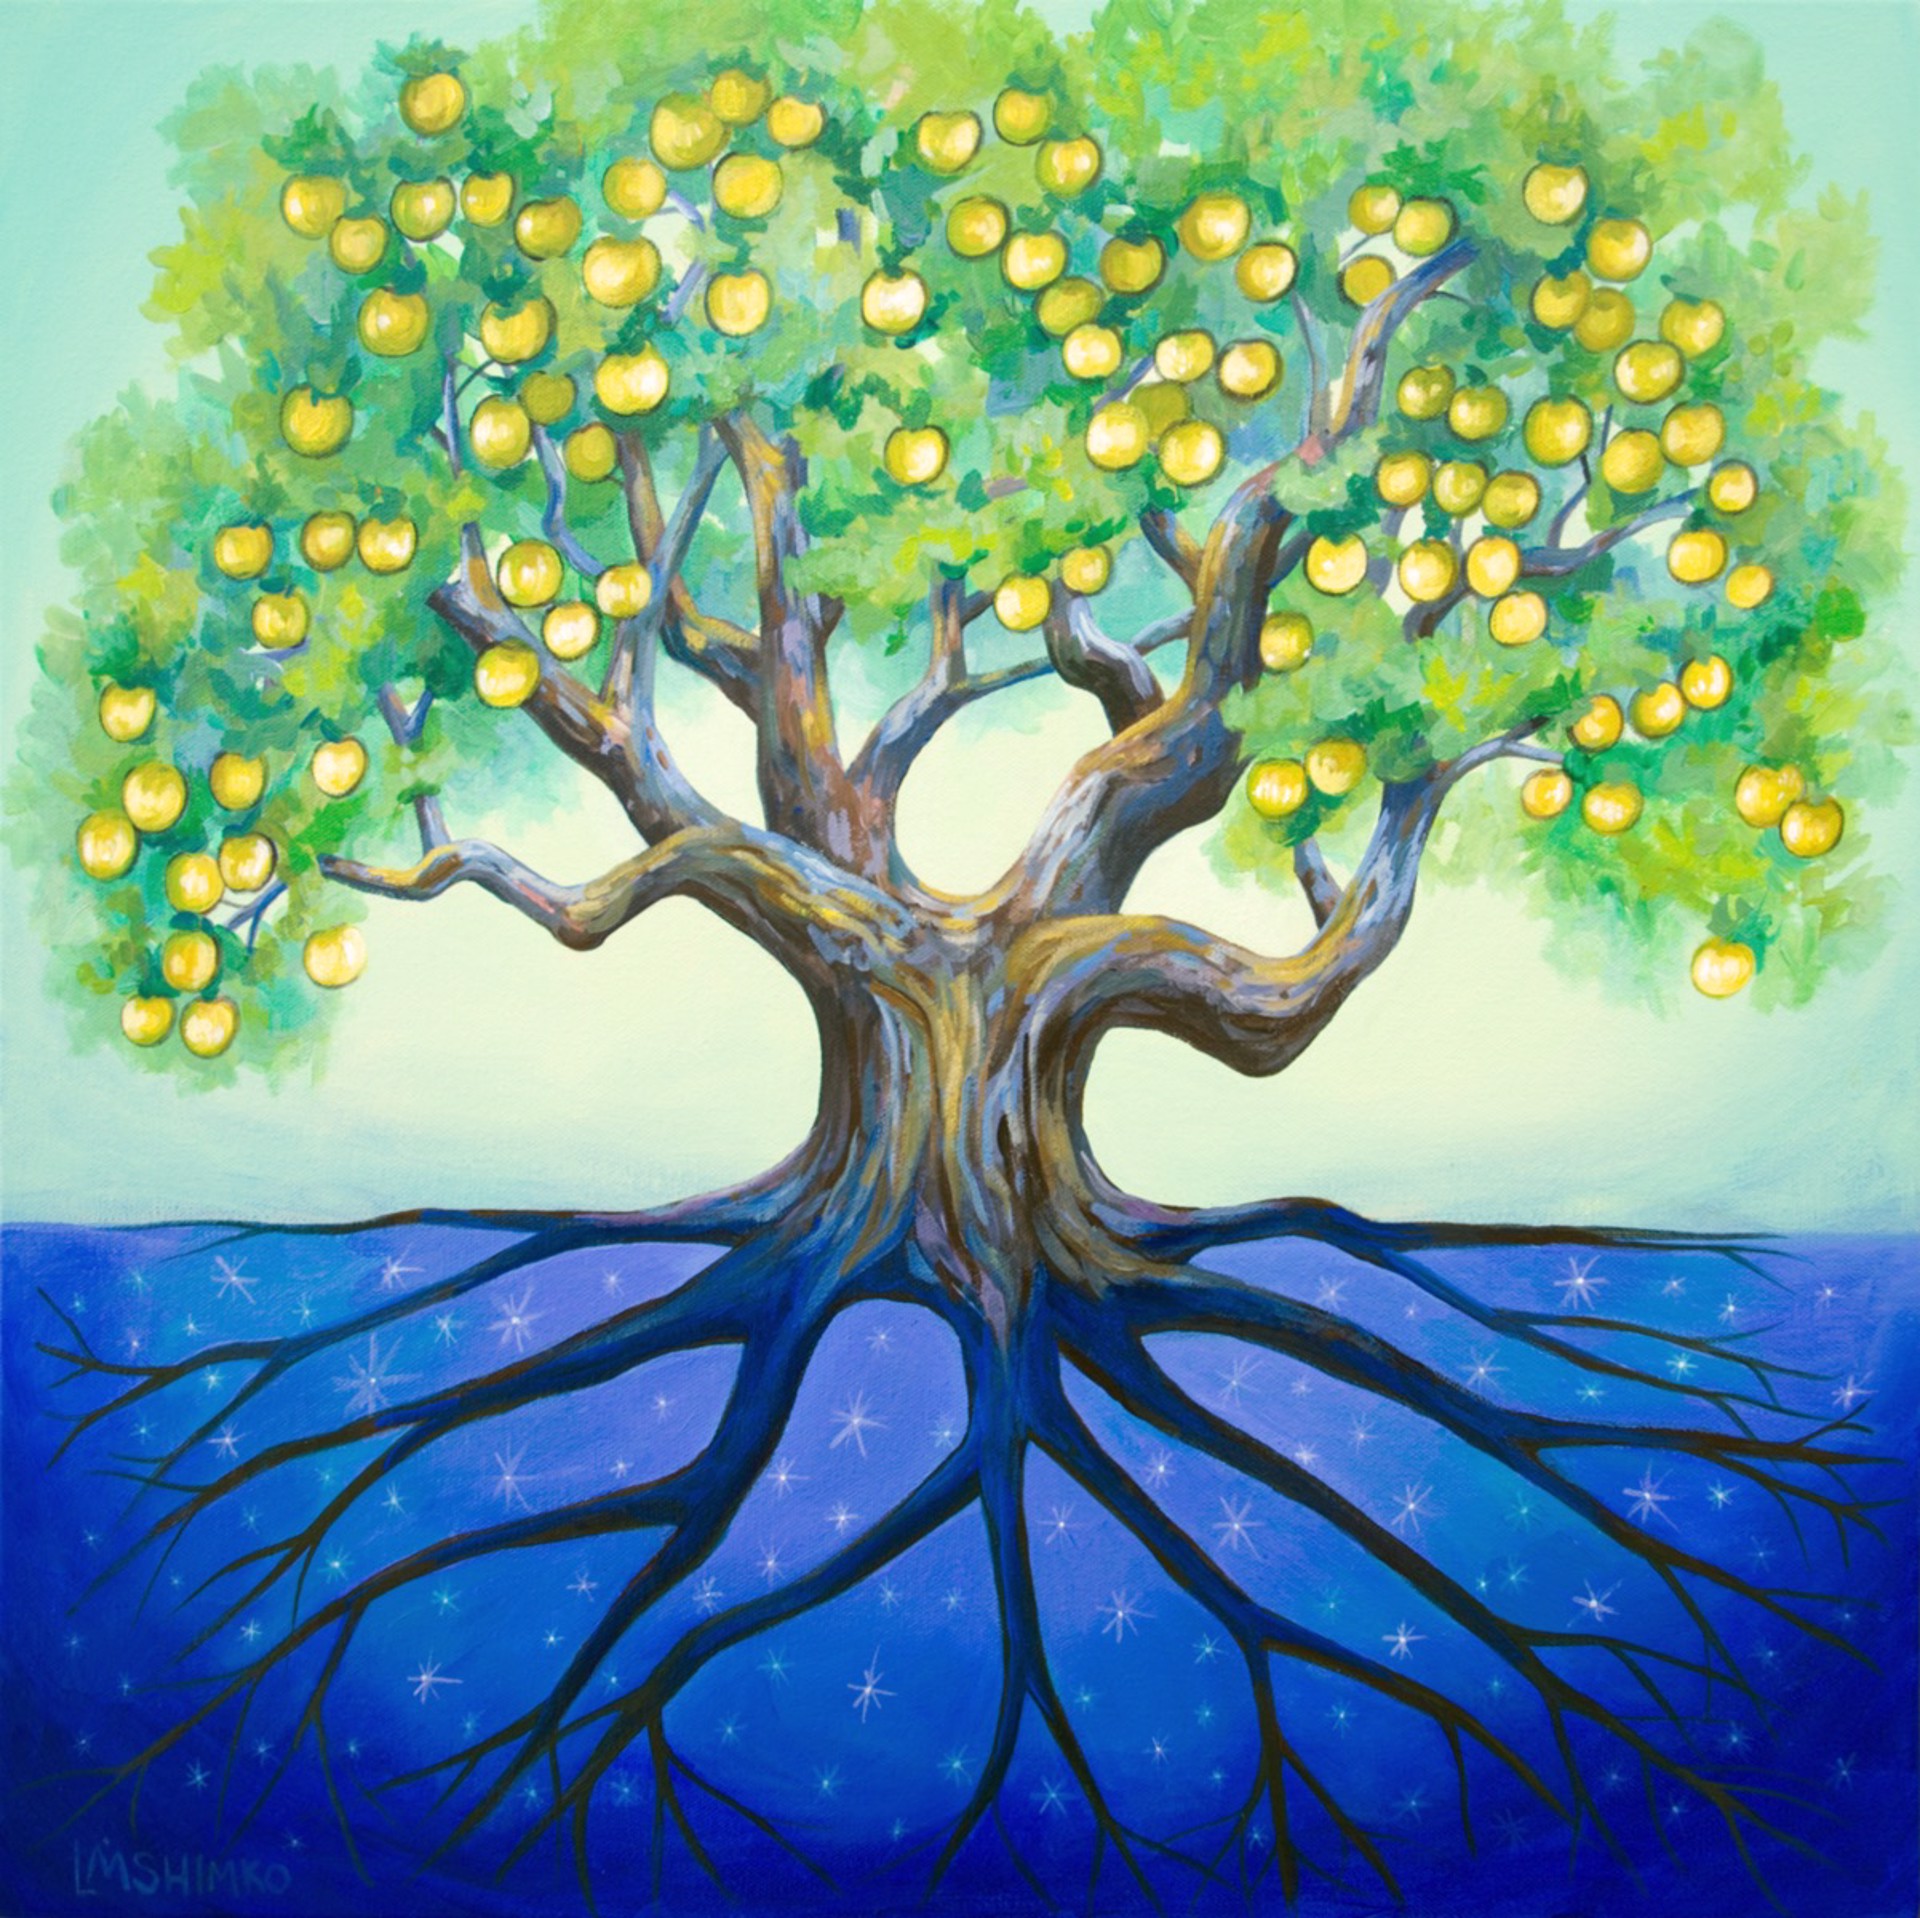 Golden Apple Tree of Life by Lisa Shimko